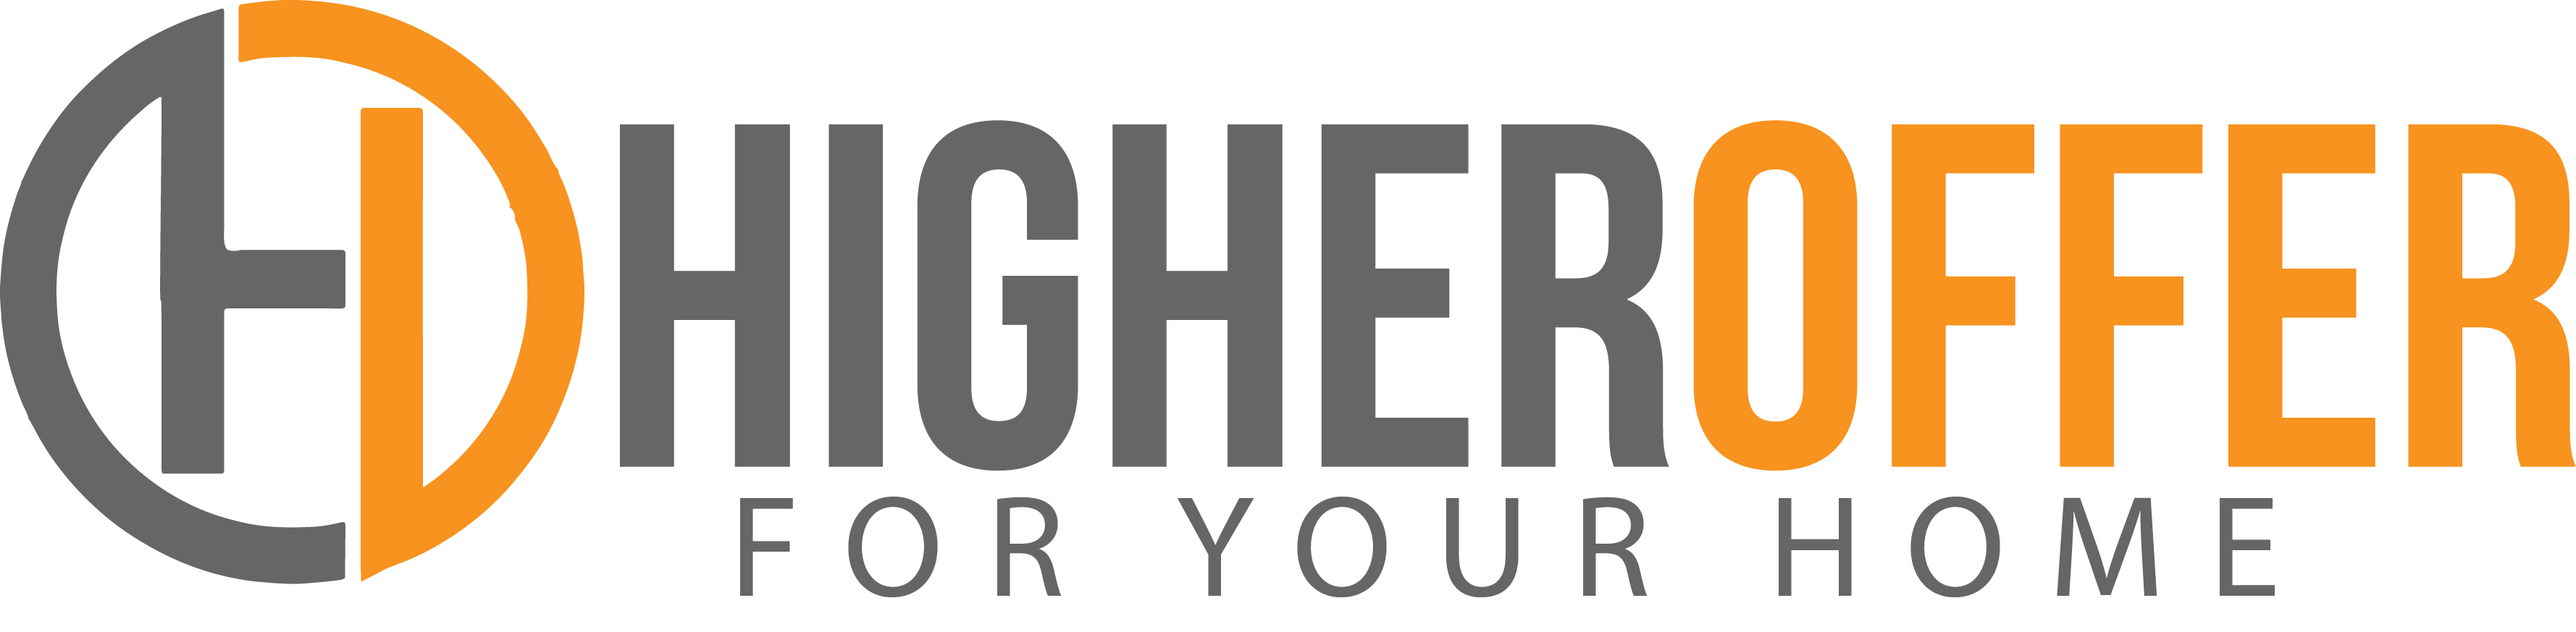 Higher Offer For Your Home logo